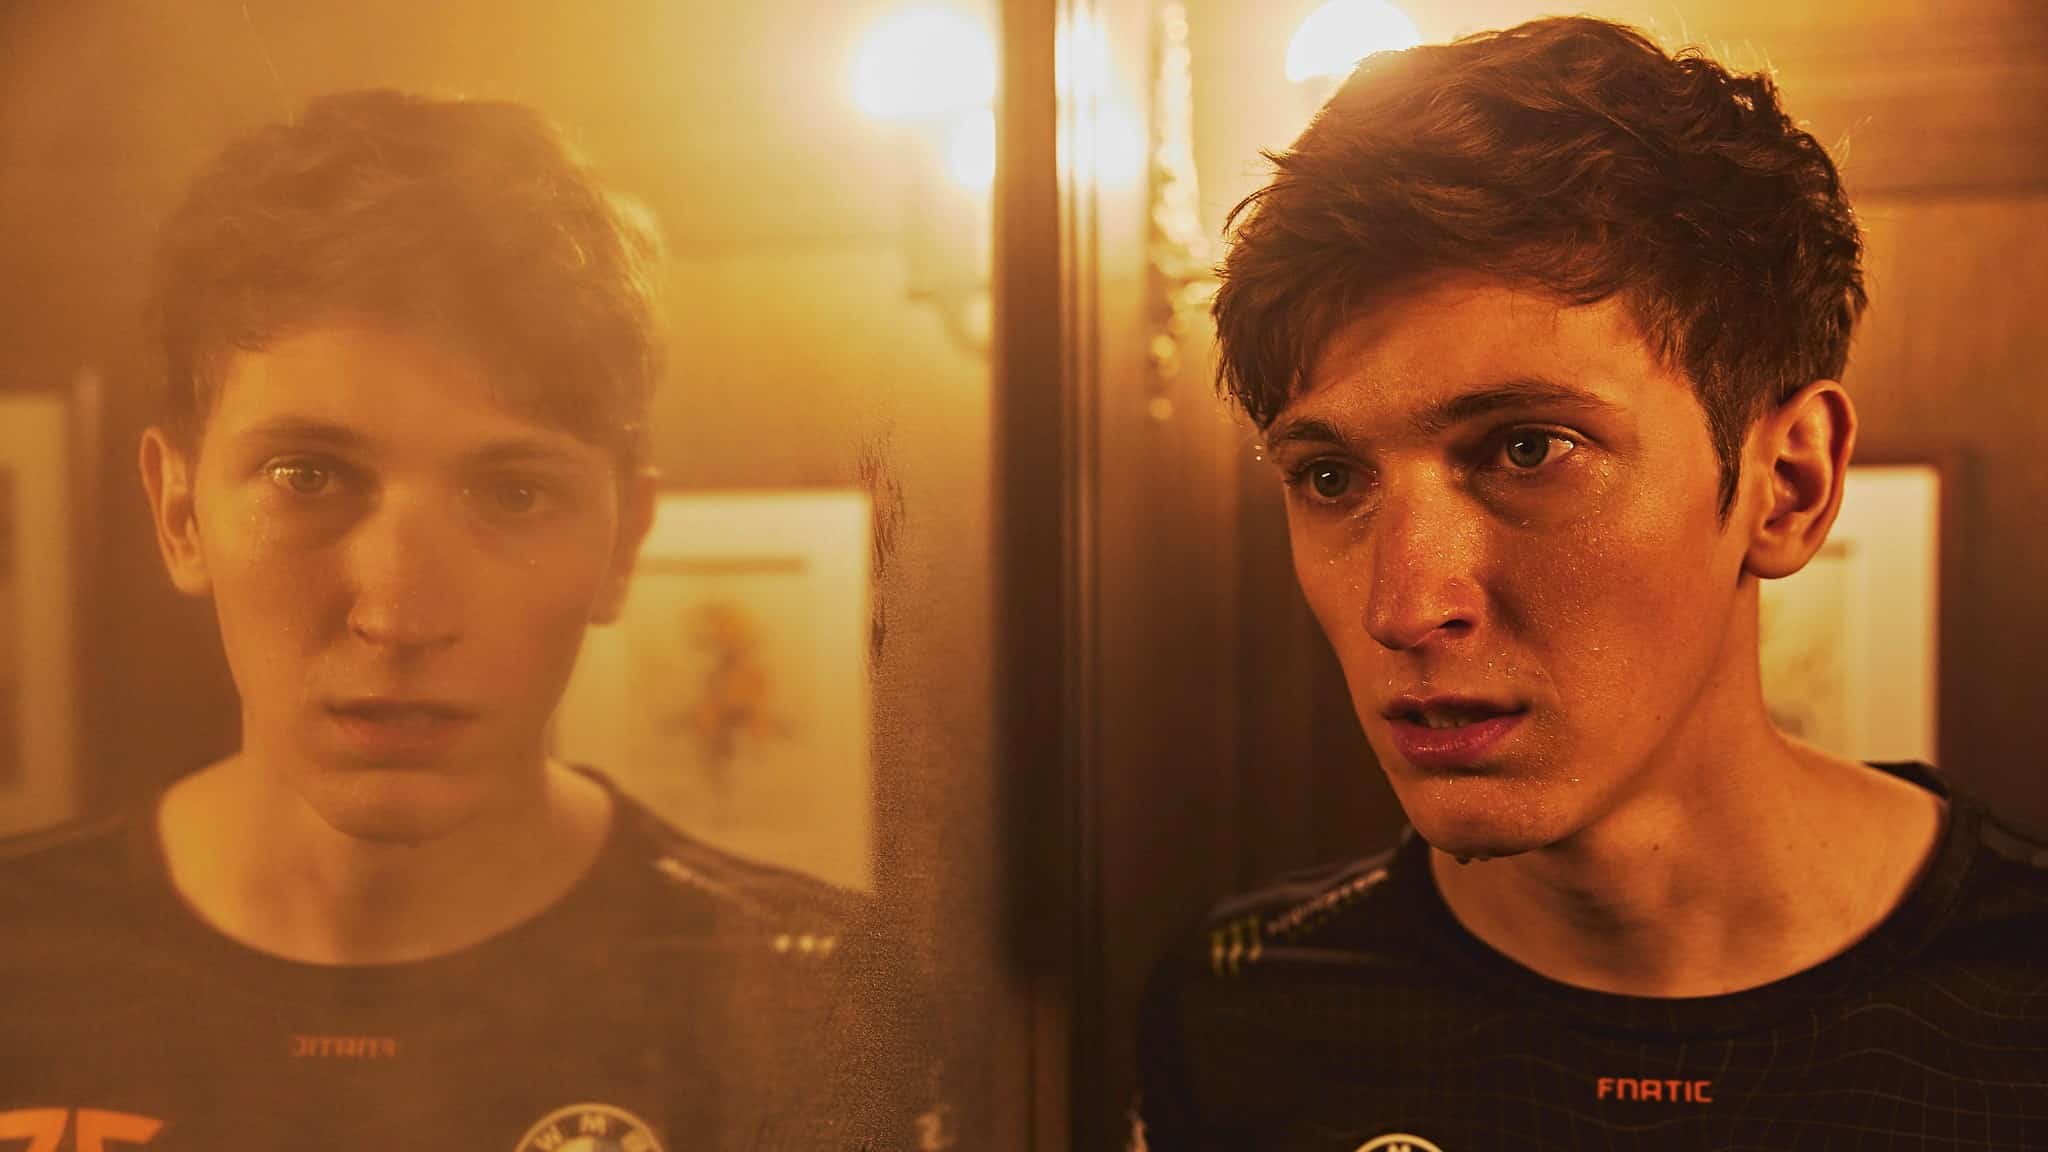 Fnatic's Boaster looks into his reflection with a concerned face.